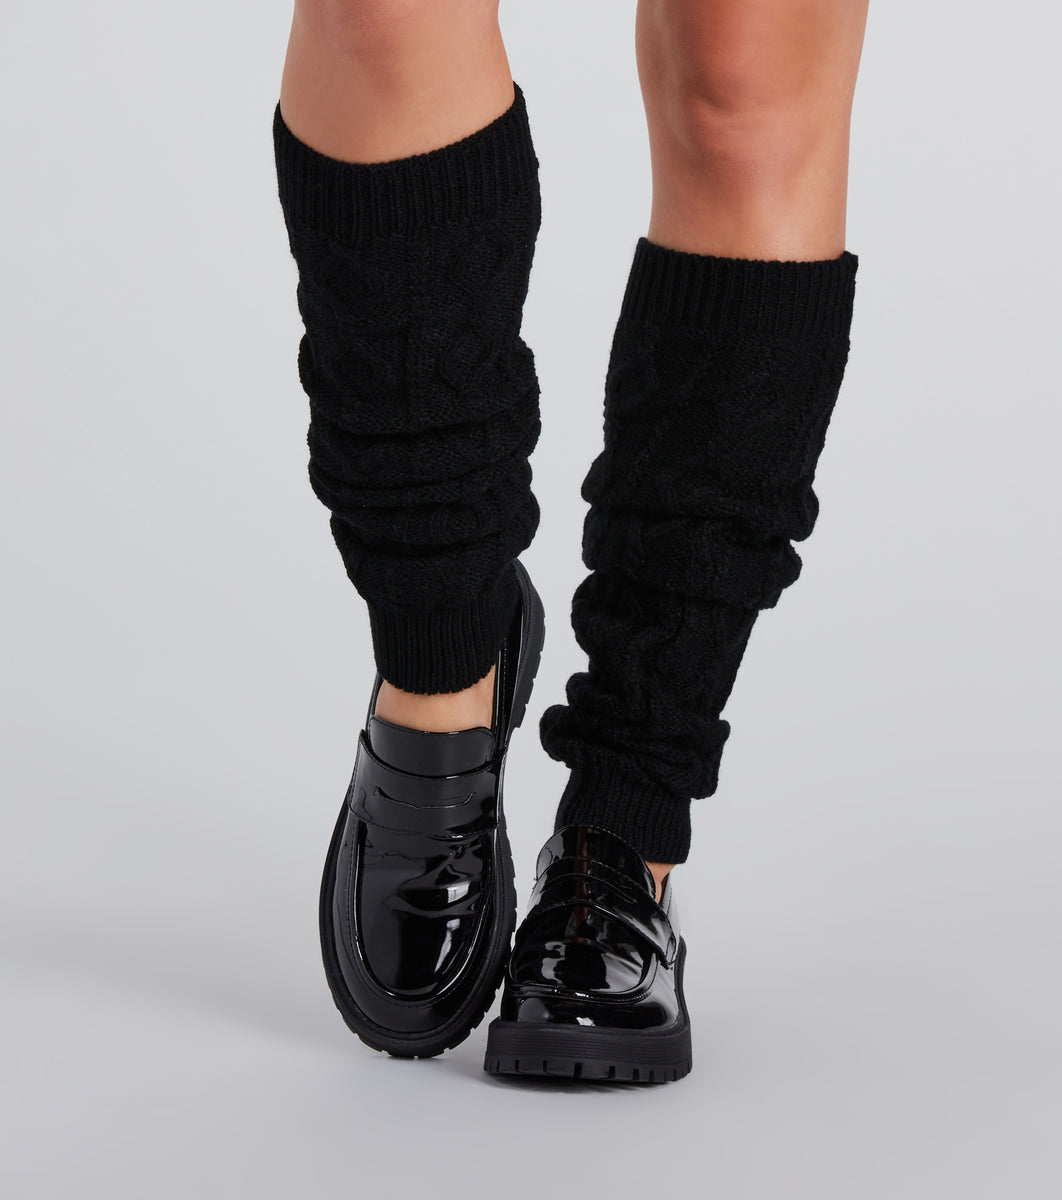 Cozy Must-Have Cable Knit Leg Warmers